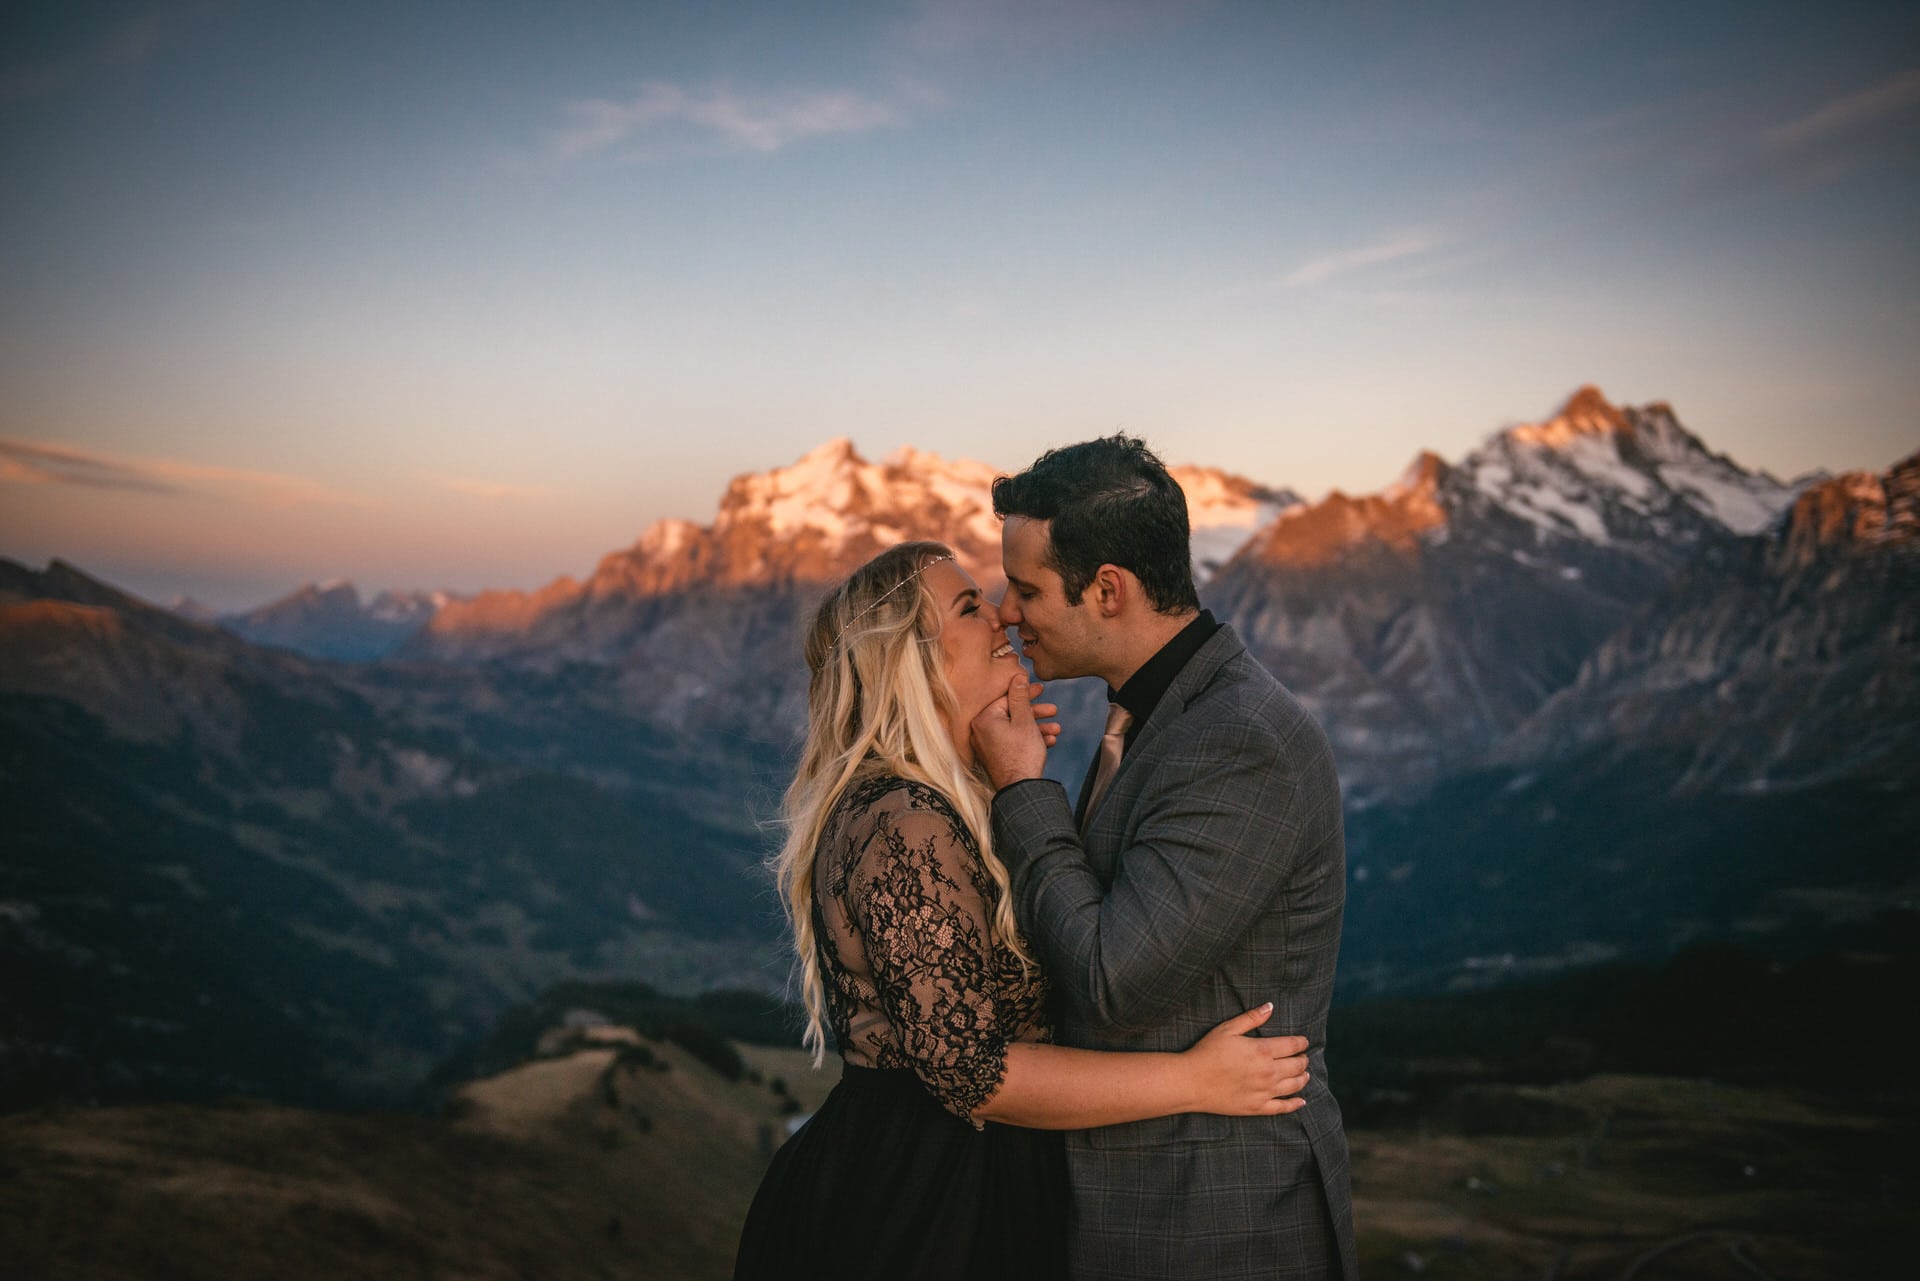 Couple enjoying the alpenglow in the Lauterbrunnen valley at sunset on their elopement day in Switzerland